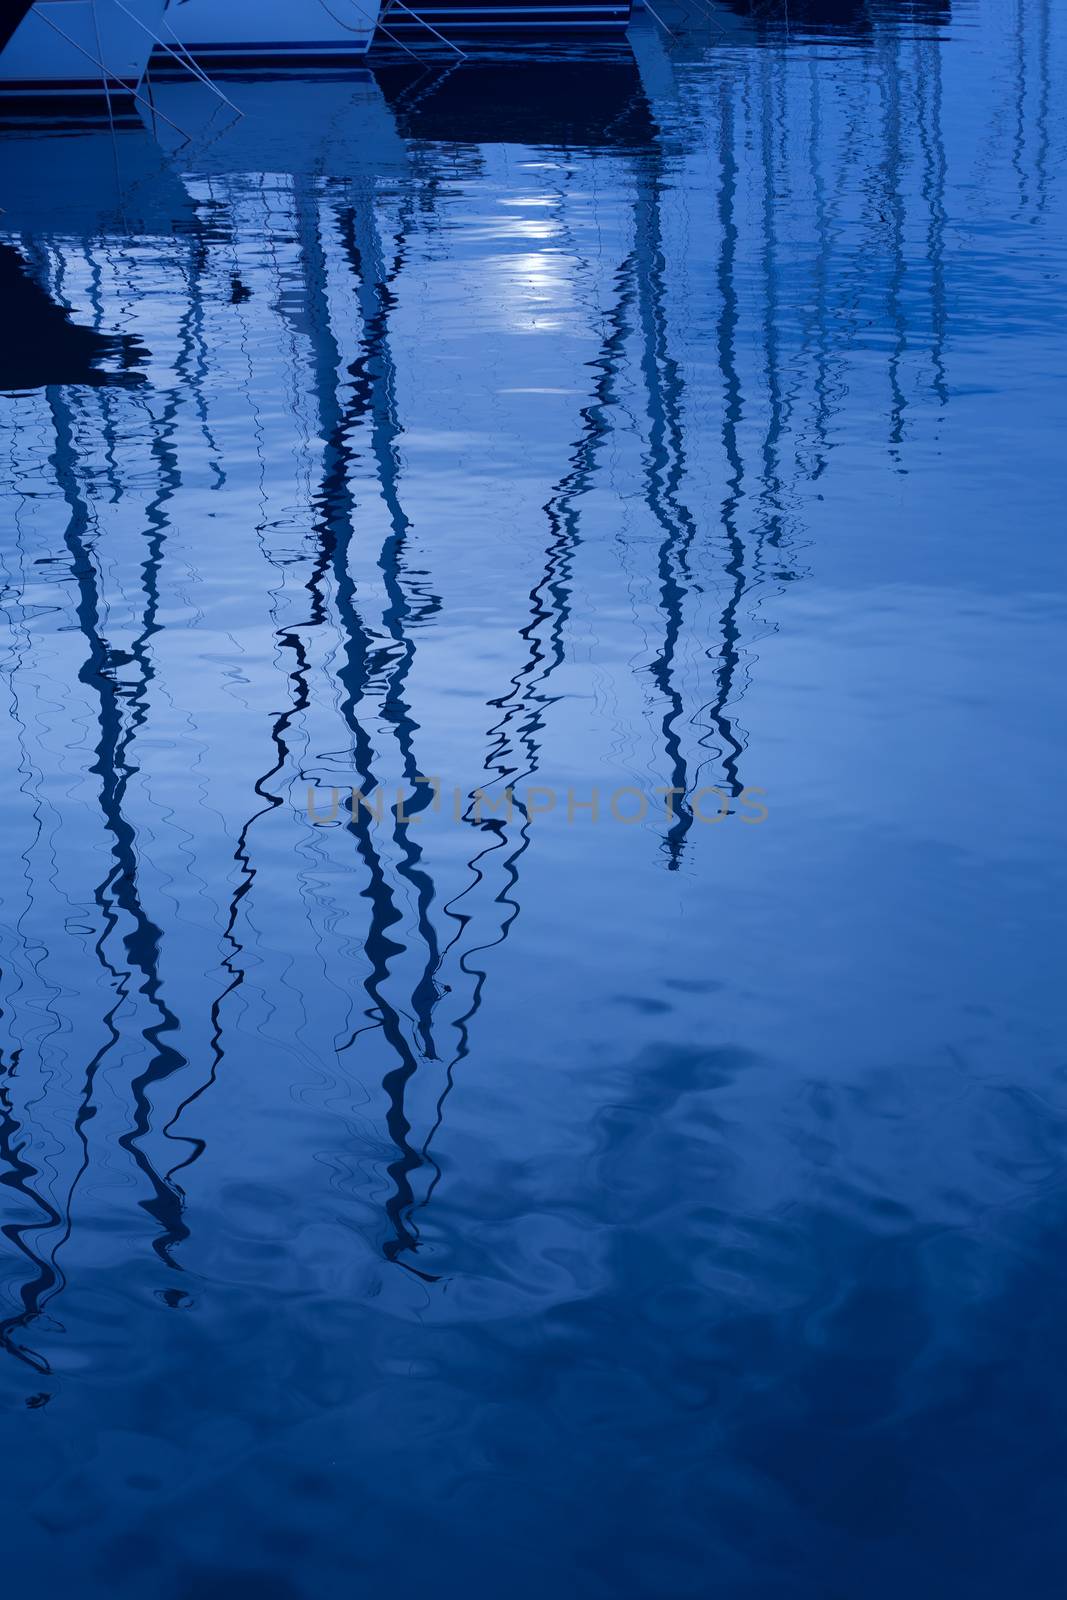 Blue water reflection of sailboats boats poles in waves by lunamarina